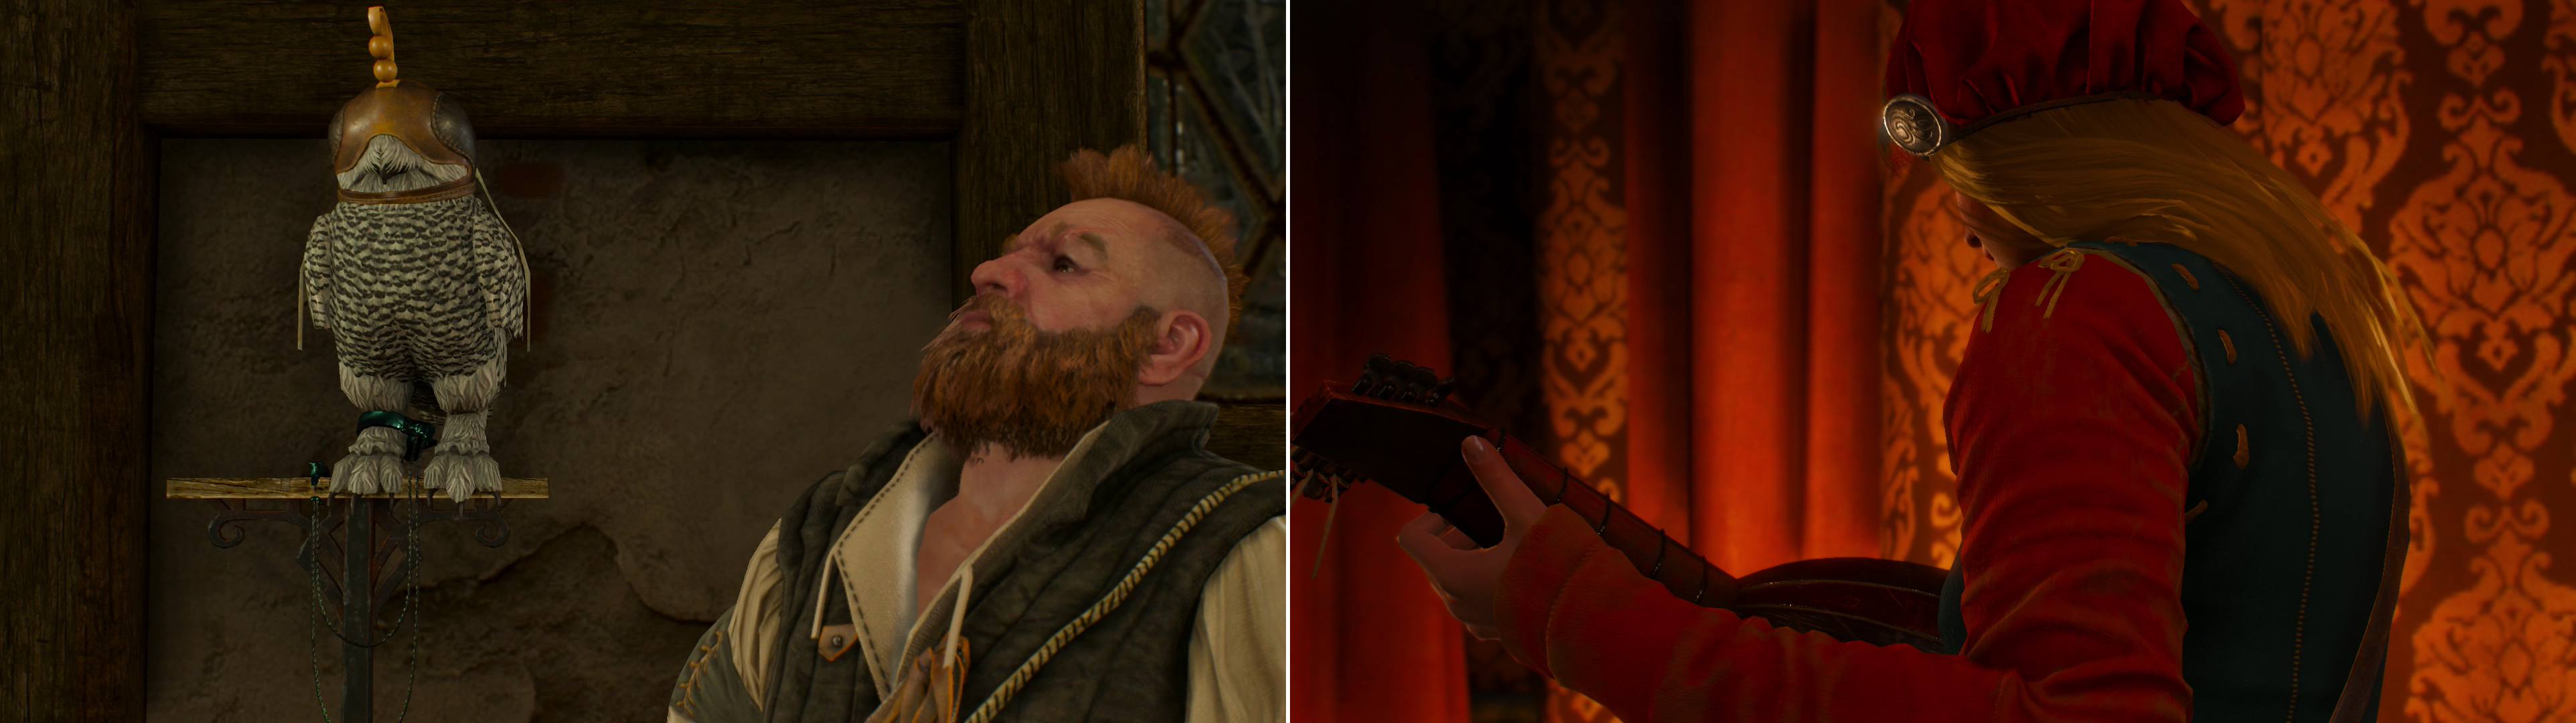 Zoltan shows off his newly-aquired, and oddly-attired, pet (left). After some expert investigation Geralt follows the leads to the object of Dandelion’s ongoing infatuation (right).